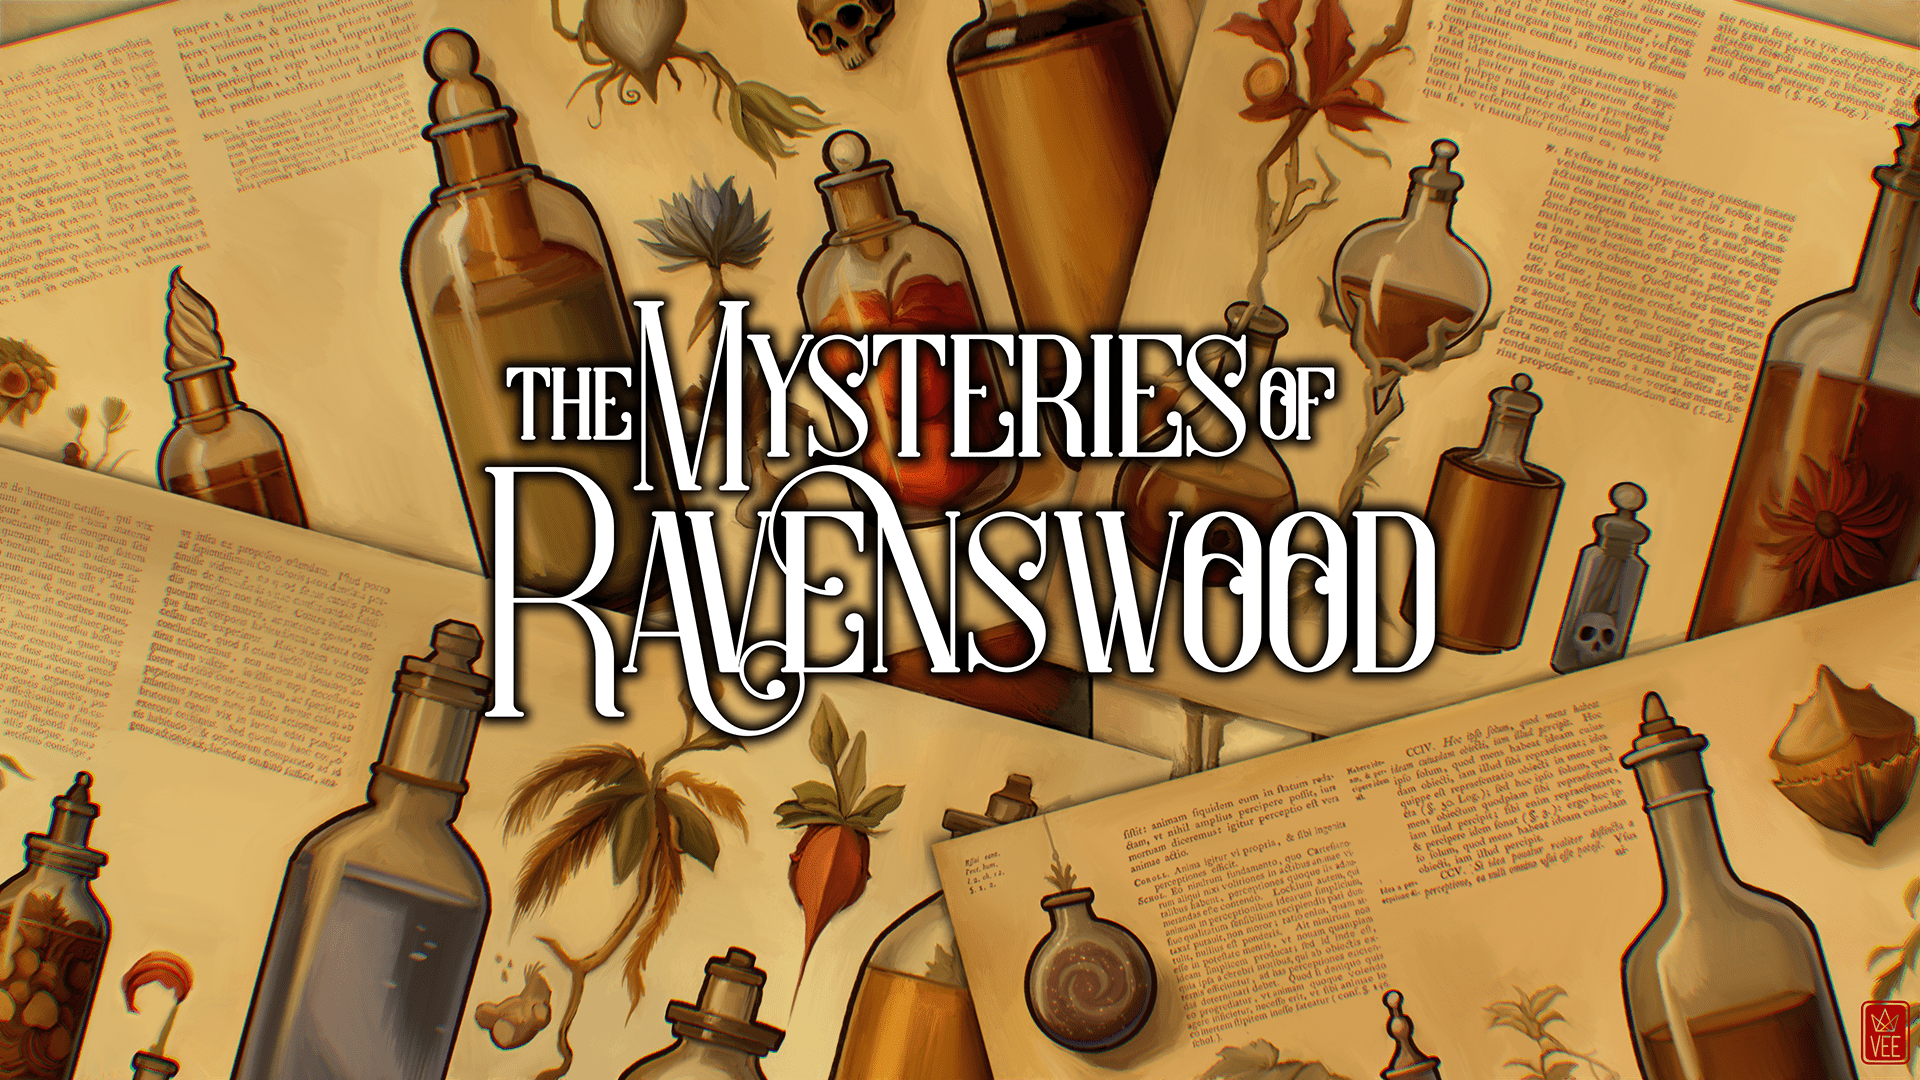 The Mysteries of Ravenswood cover, over many pages of old parchment depicting potions and magic